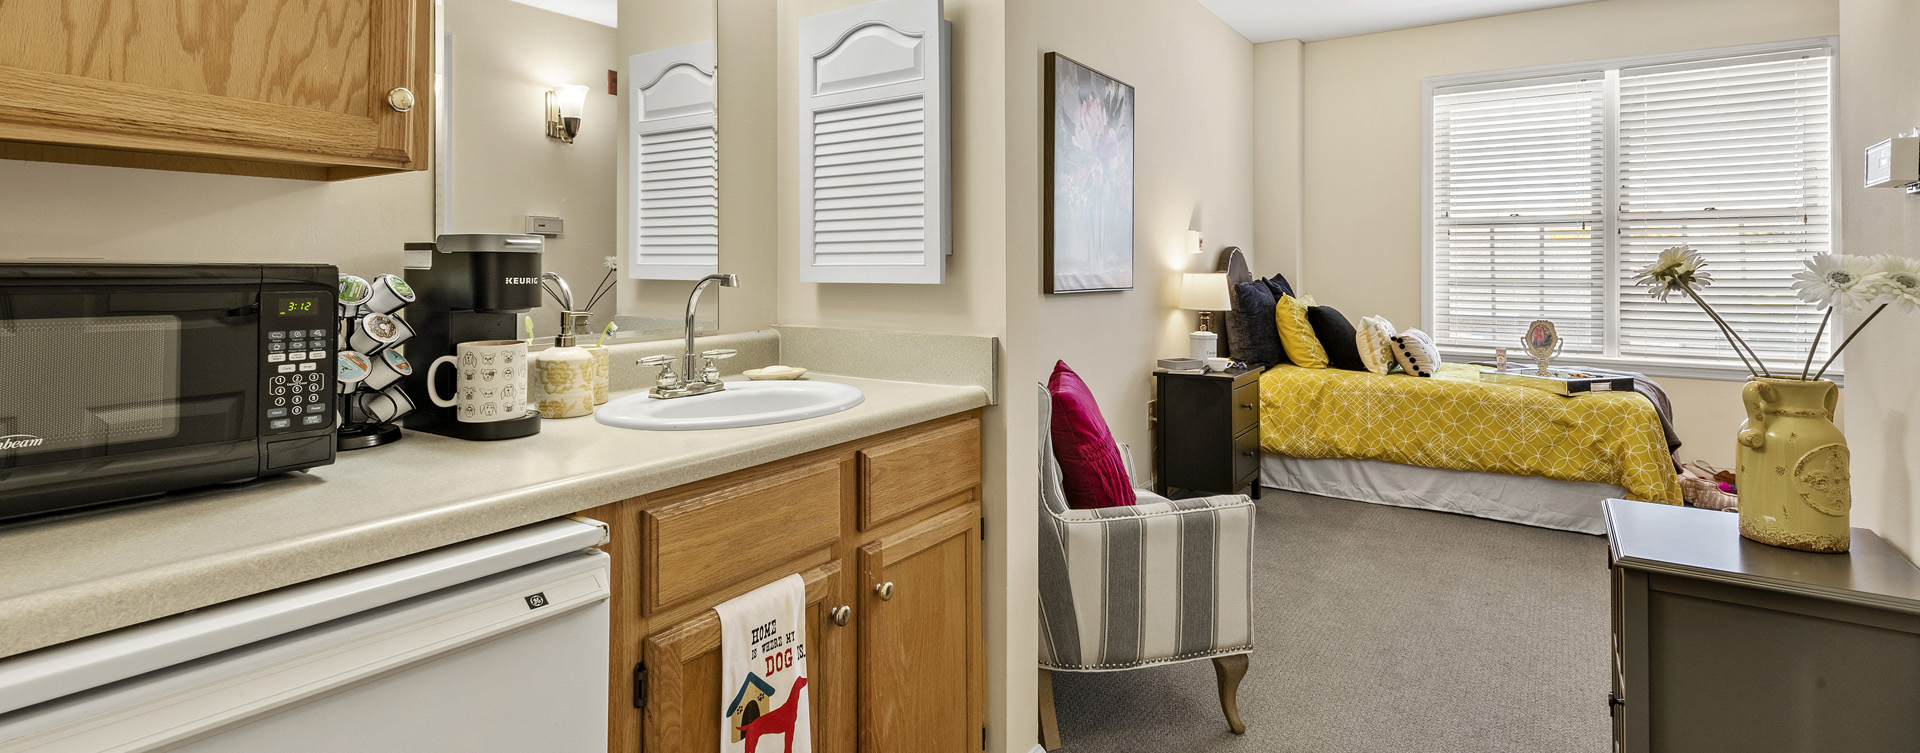 Get a new lease on life with a cozy apartment at Bickford of Worthington